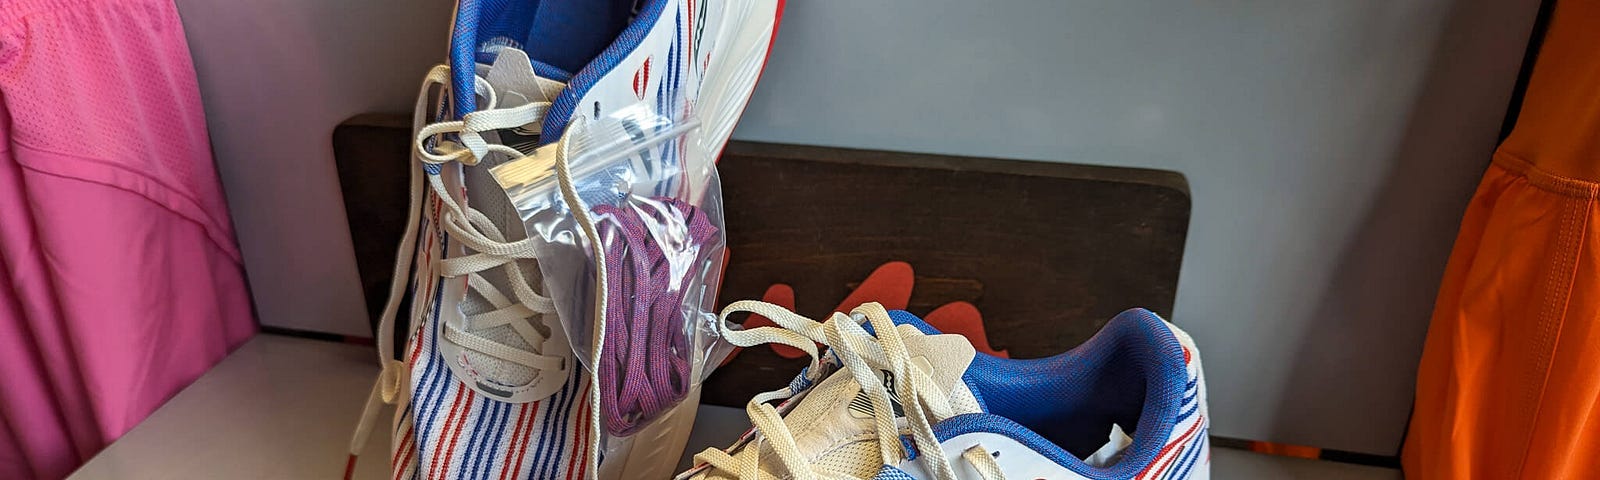 A pair of red, white, and blue running shoes